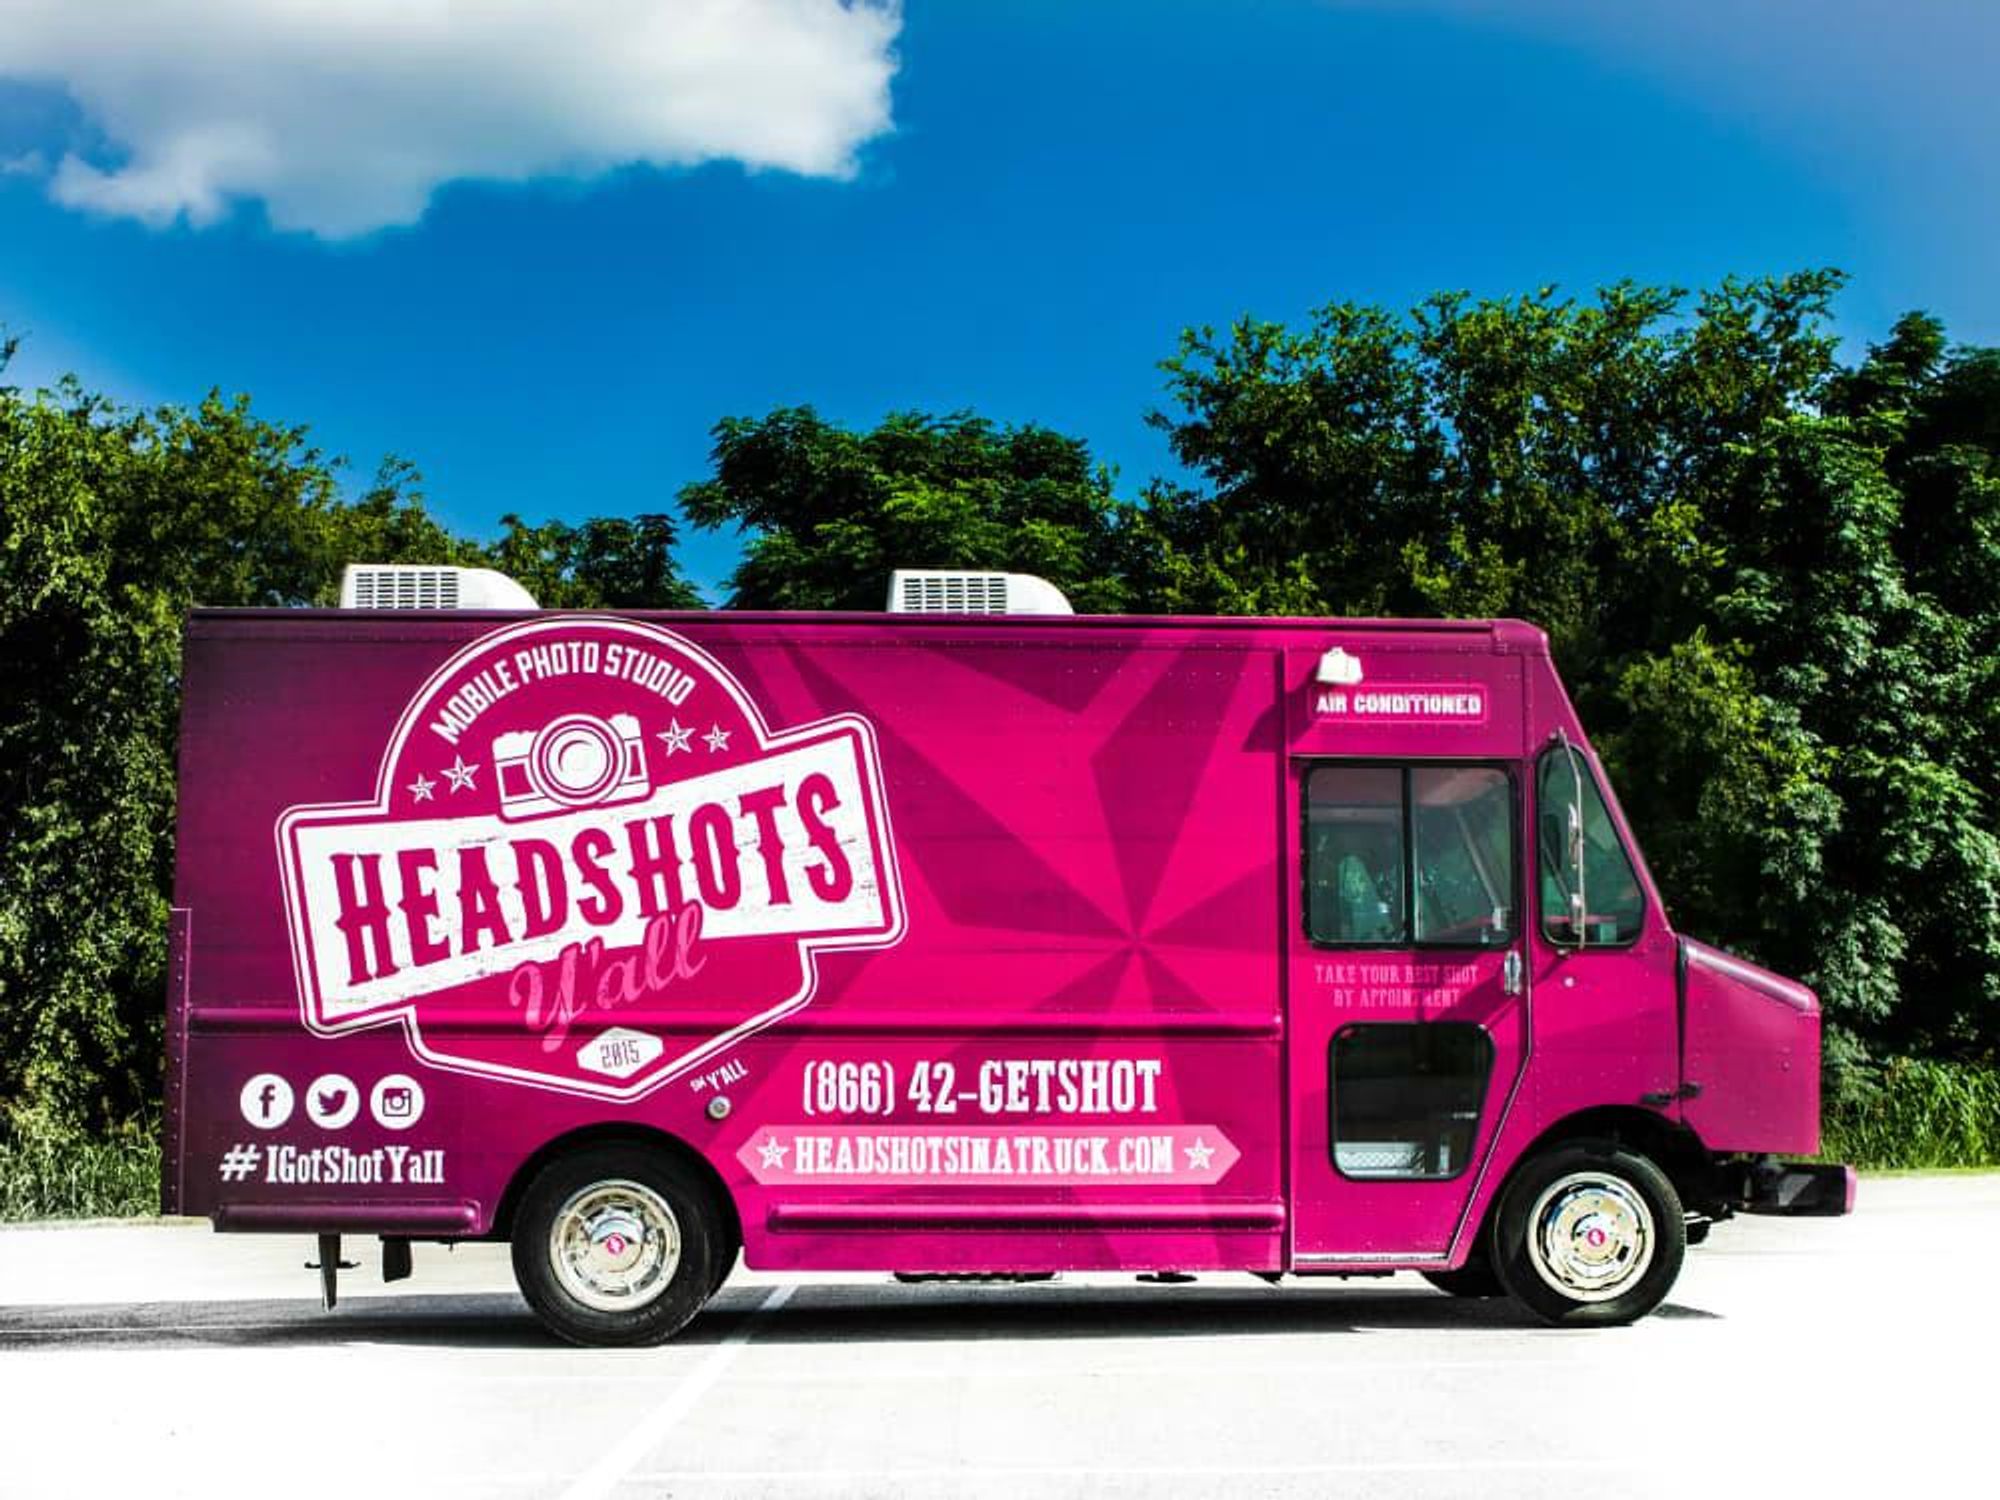 Headshots Y'all mobile photography studio picture truck Austin 2015